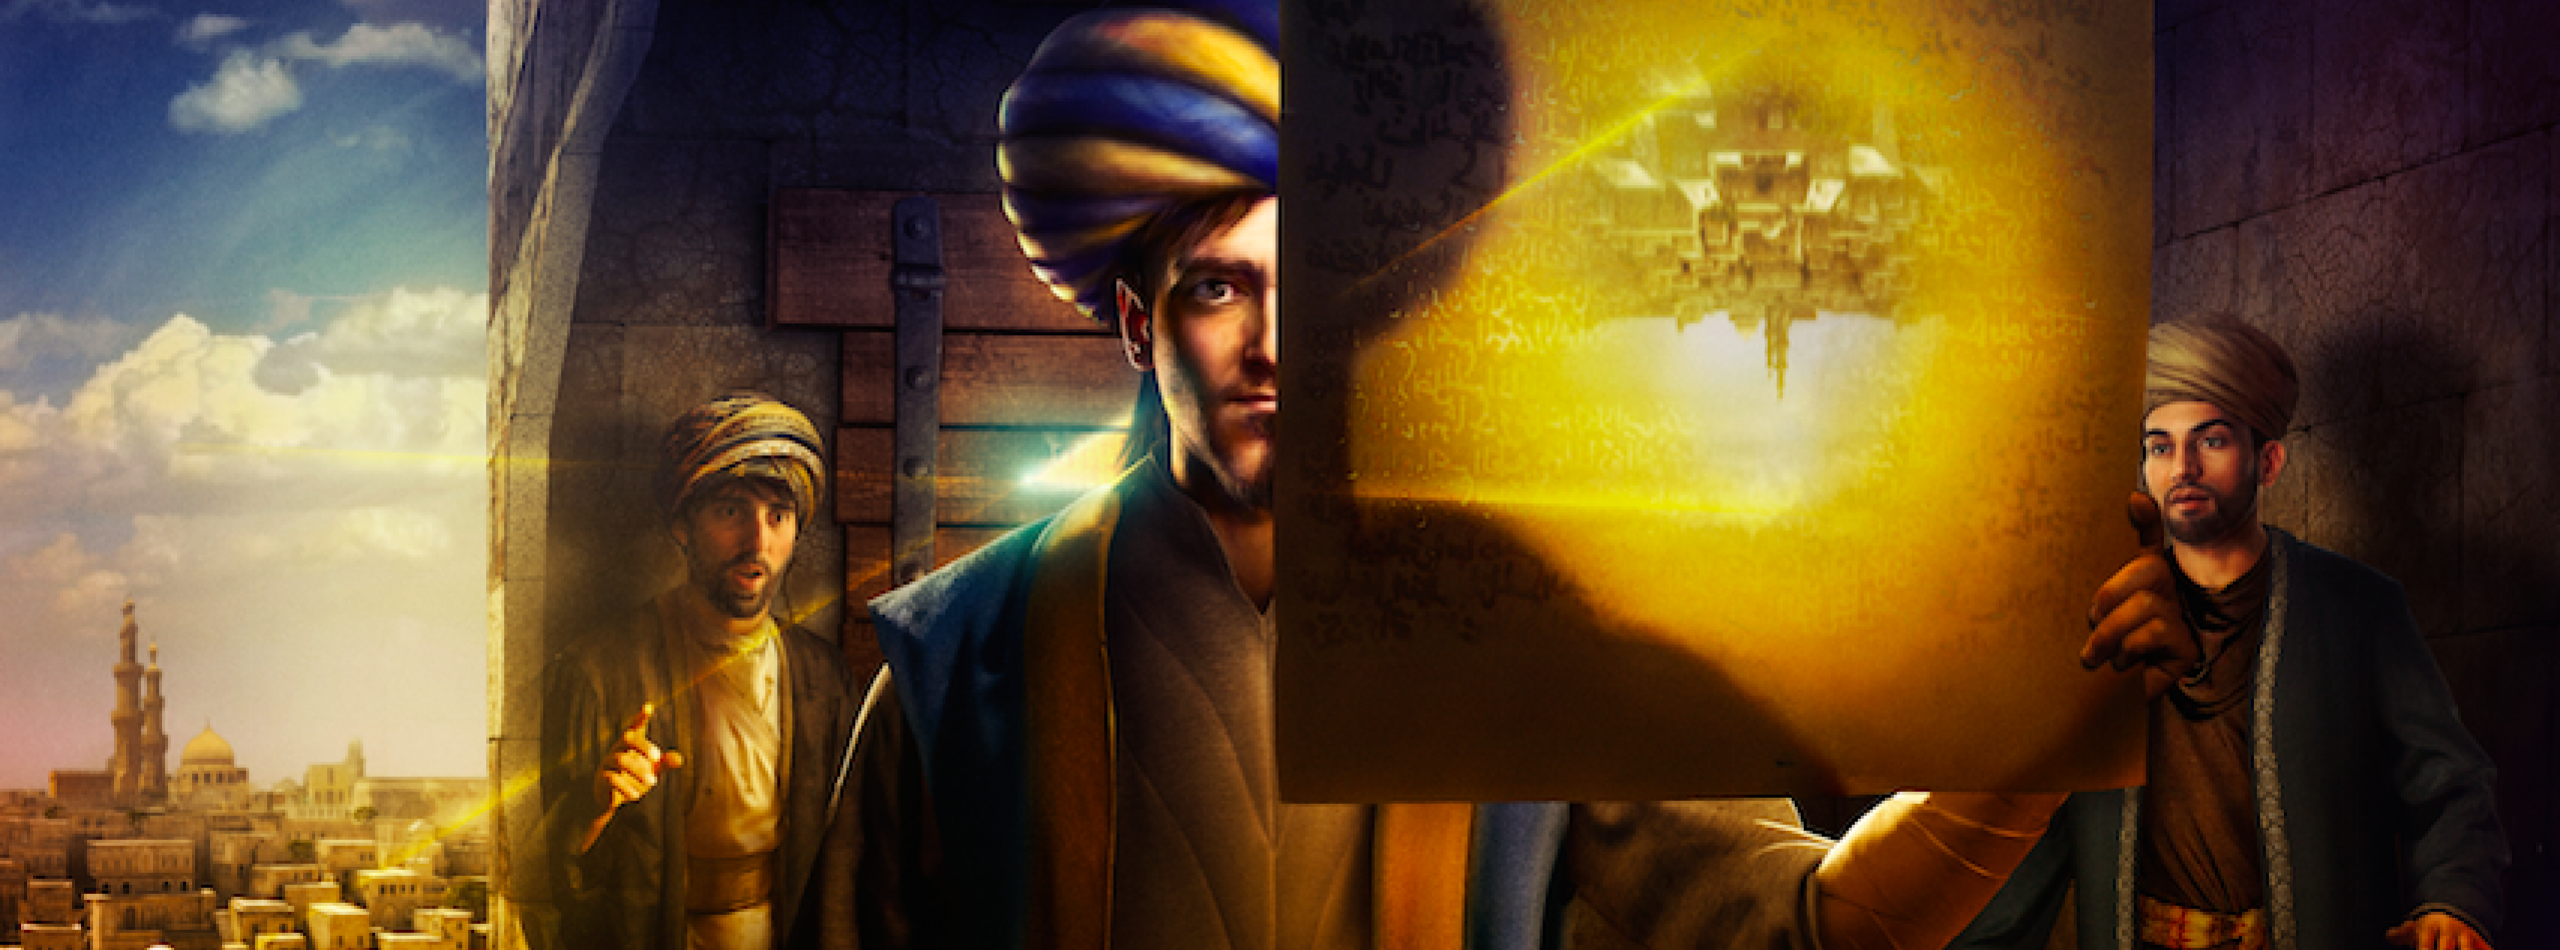 1001 Inventions and The World of Ibn Al-Haytham